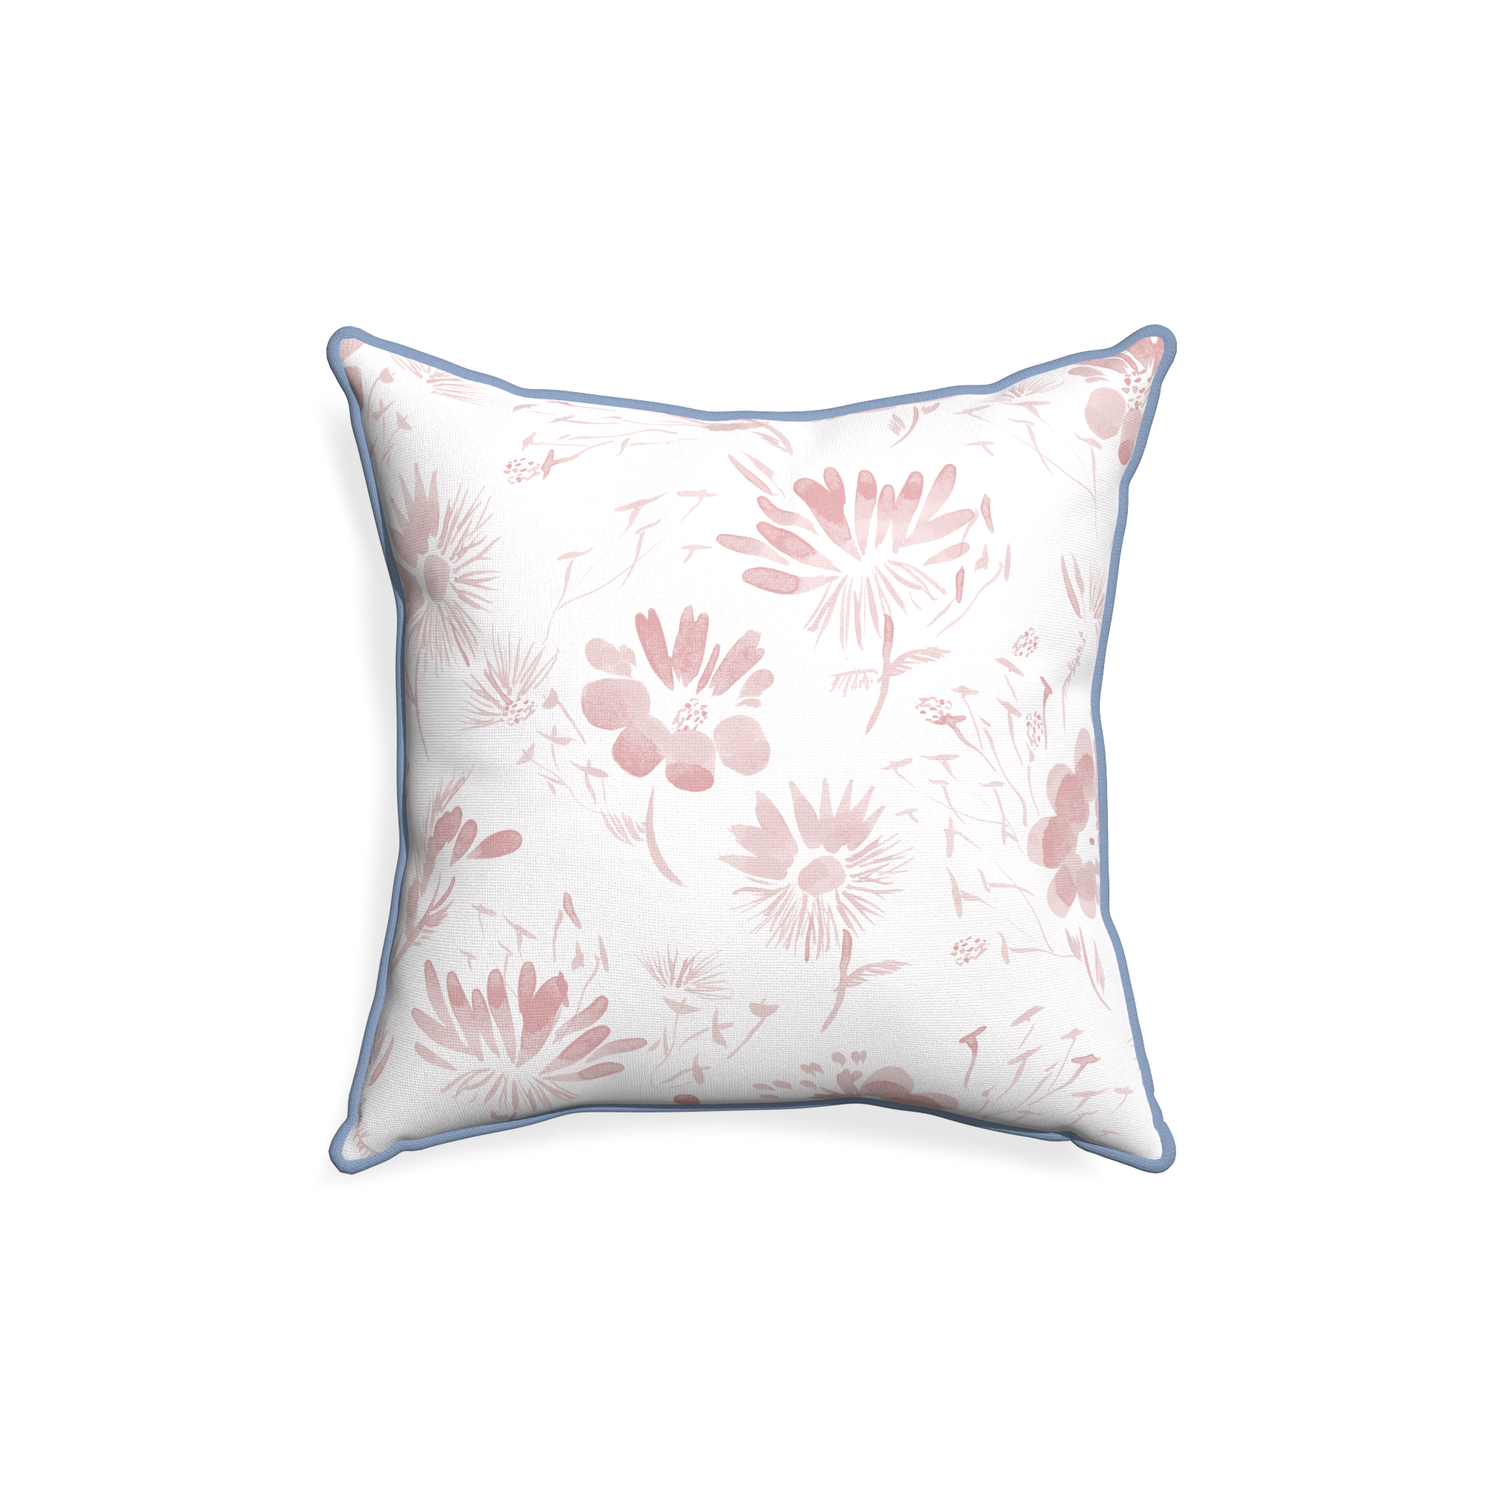 18-square blake custom pillow with sky piping on white background